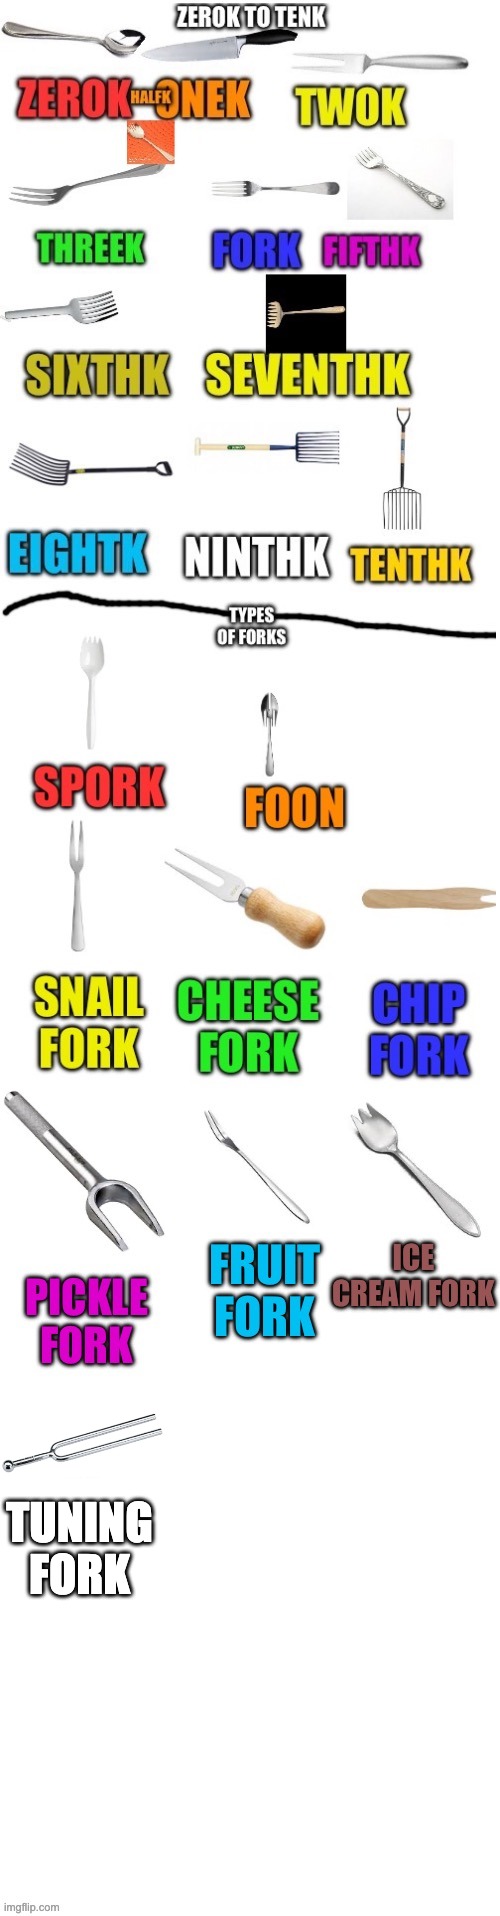 More Fork | TUNING FORK | image tagged in q | made w/ Imgflip meme maker